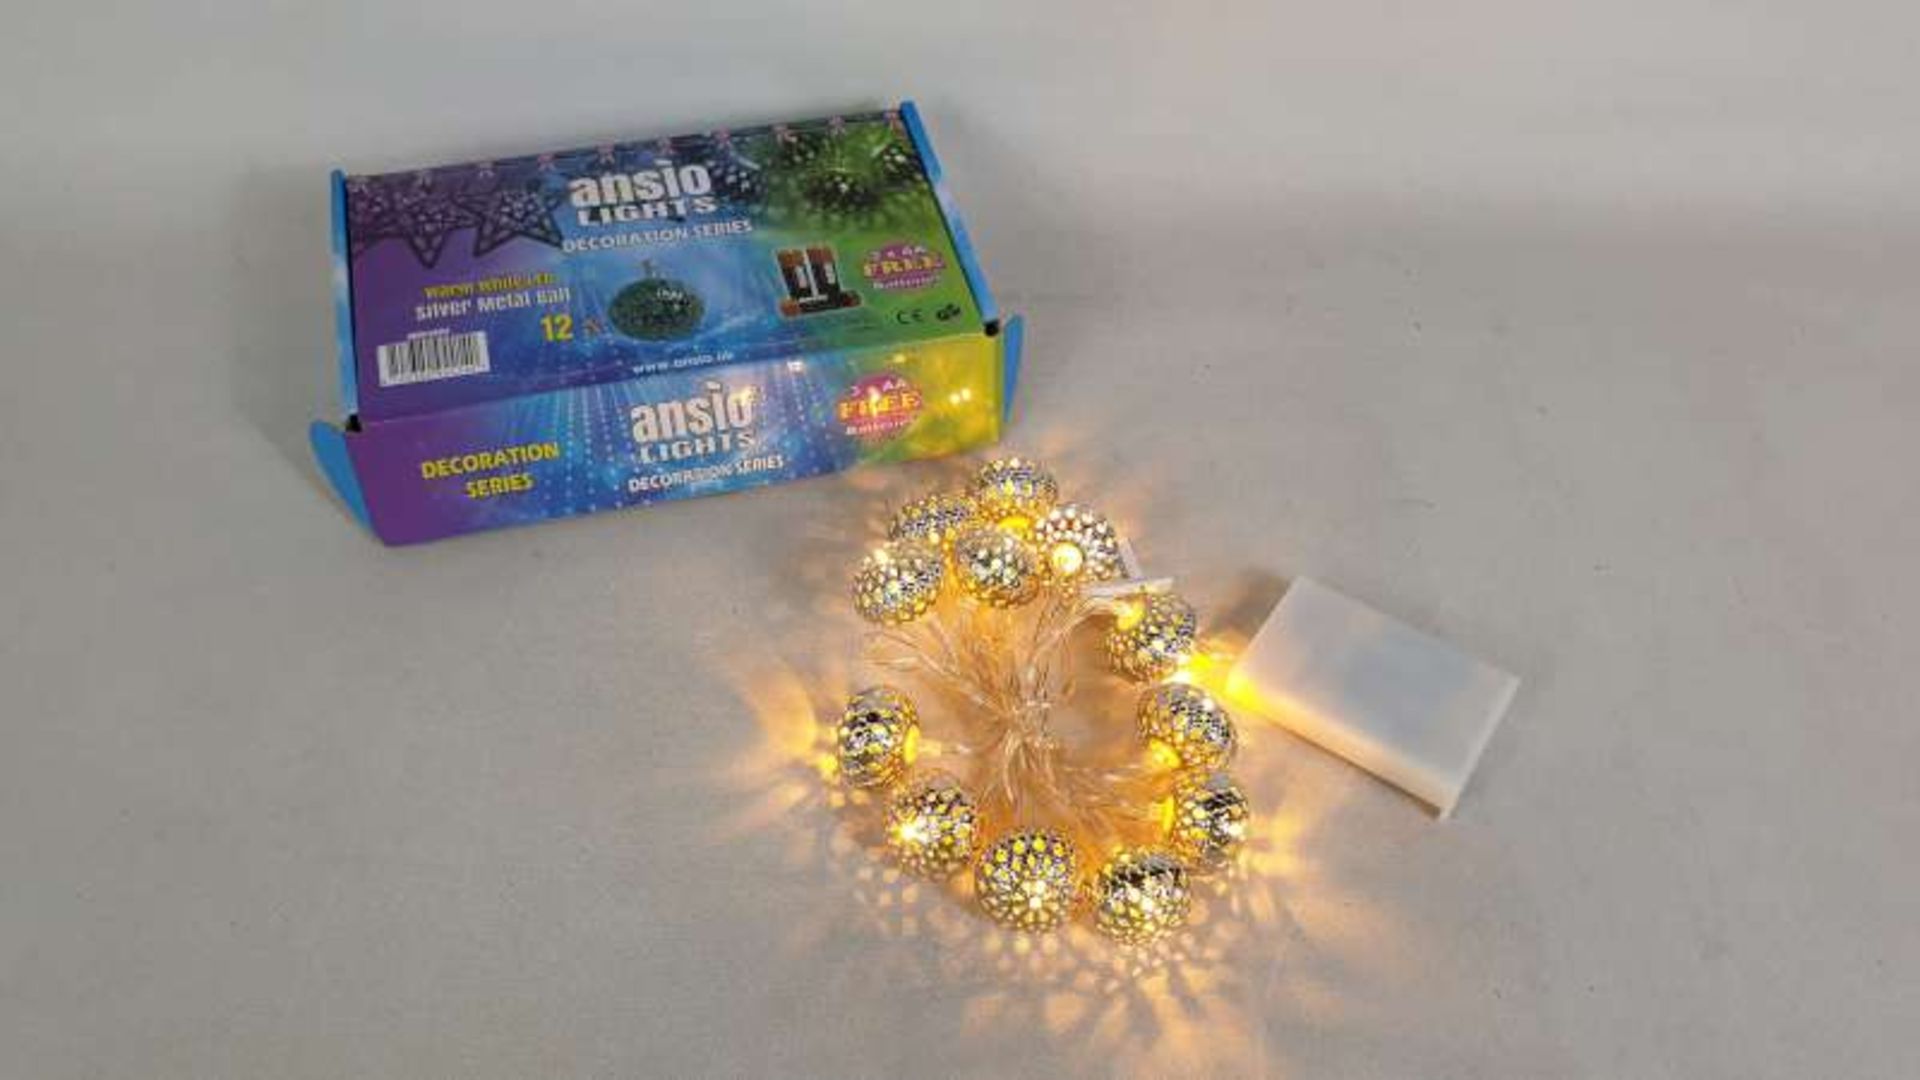 50 X BRAND NEW 12 LED SIVER METAL BALL BATTERY OPERATED LIGHTS IN 2 BOXES